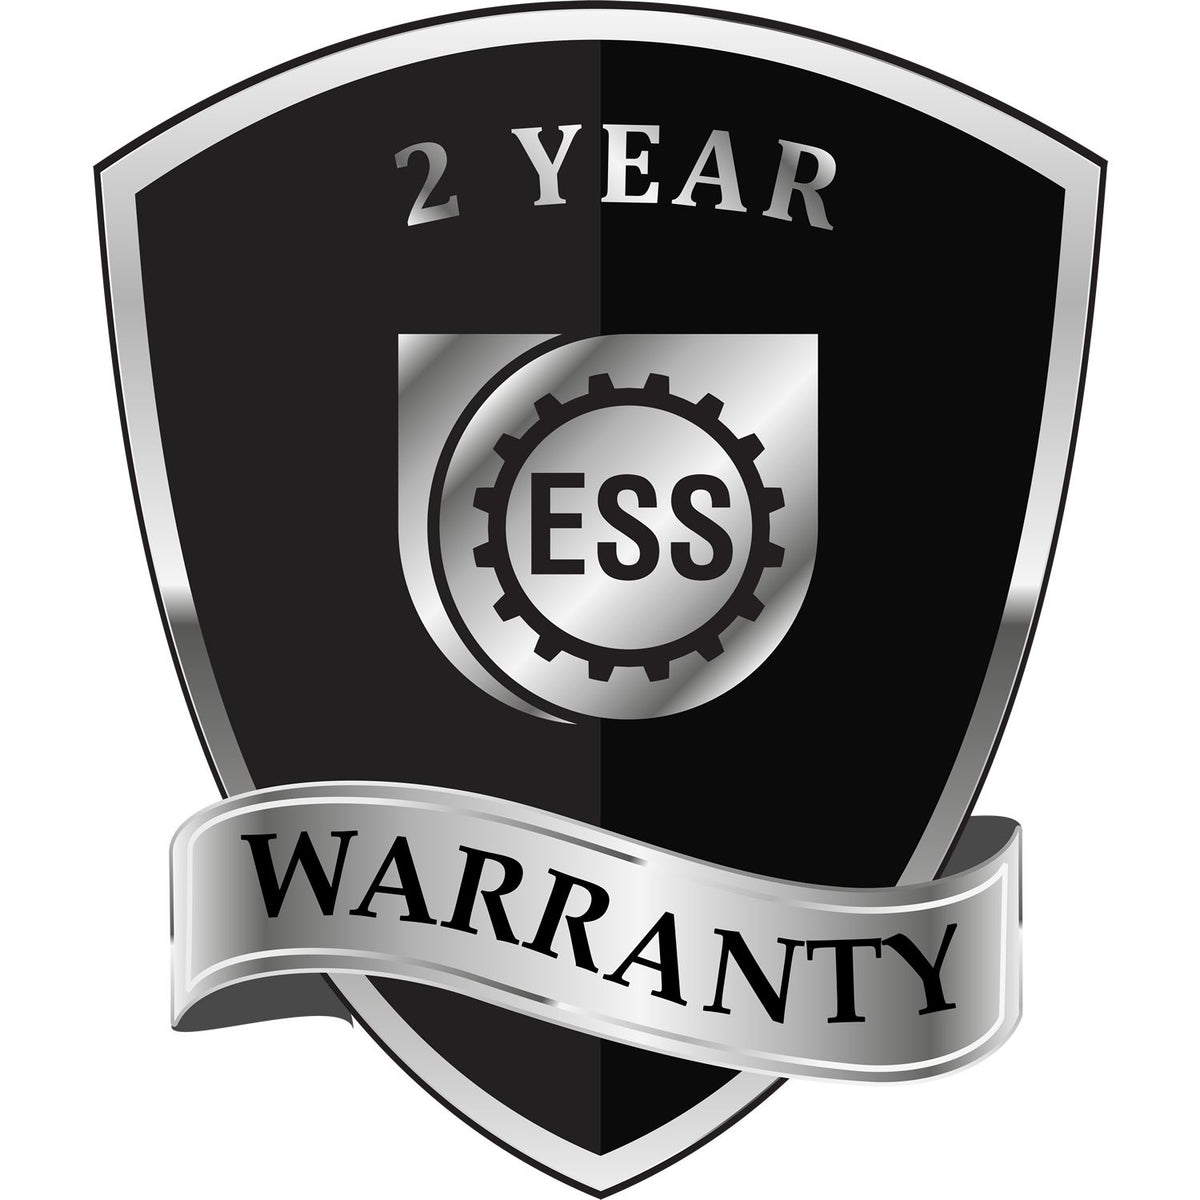 A black and silver badge or emblem showing warranty information for the State of Wisconsin Extended Long Reach Geologist Seal